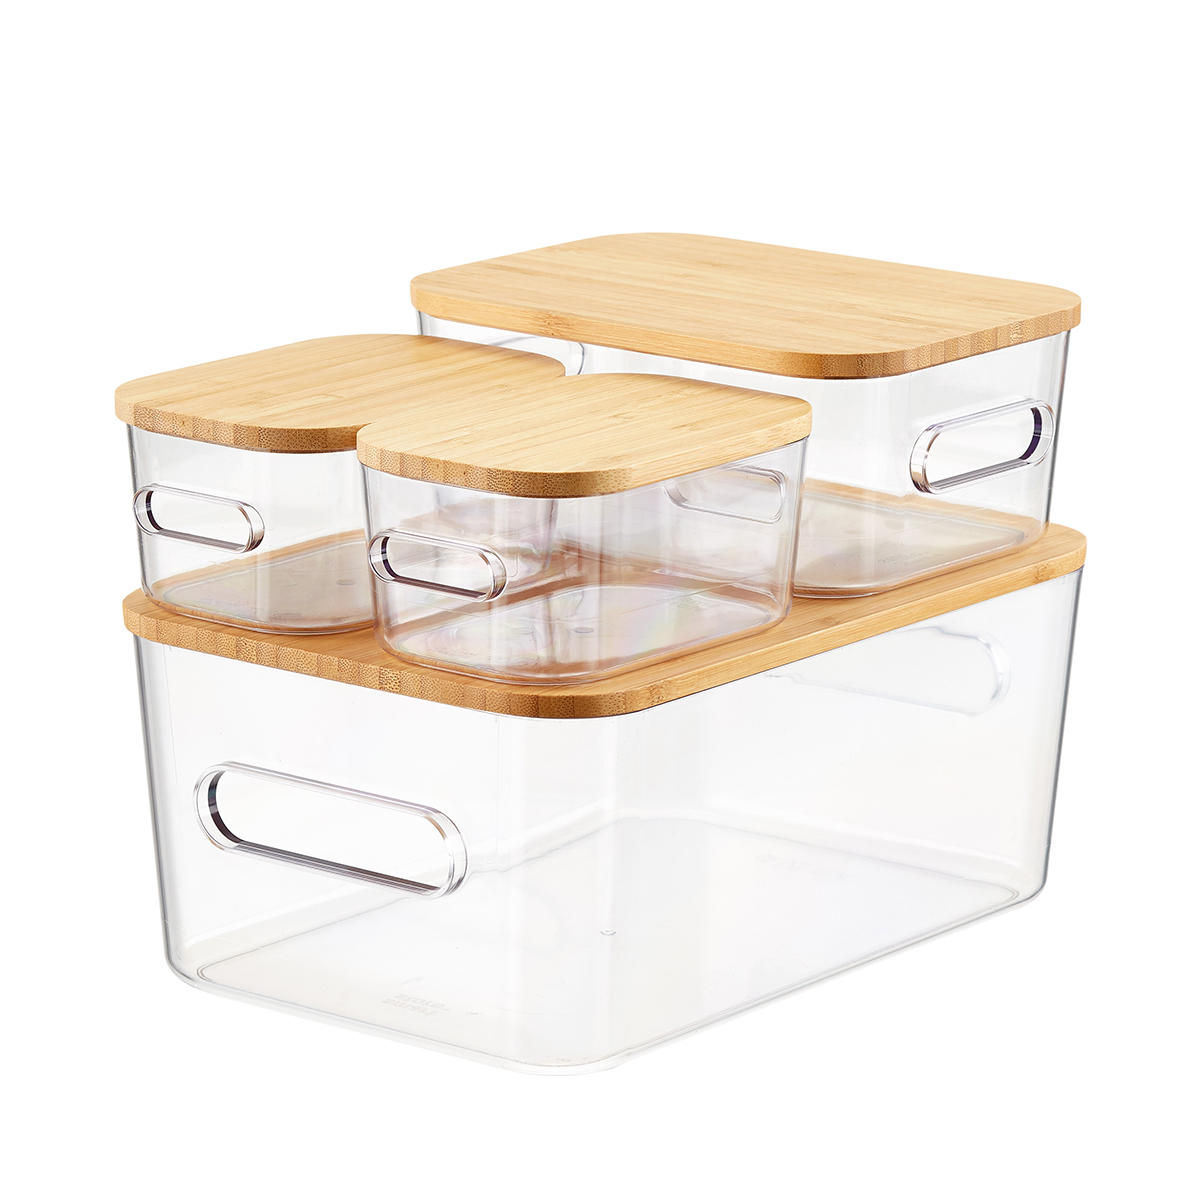 https://www.containerstore.com/catalogimages/364538/10077435-compact-plastic-bins-4pack-.jpg